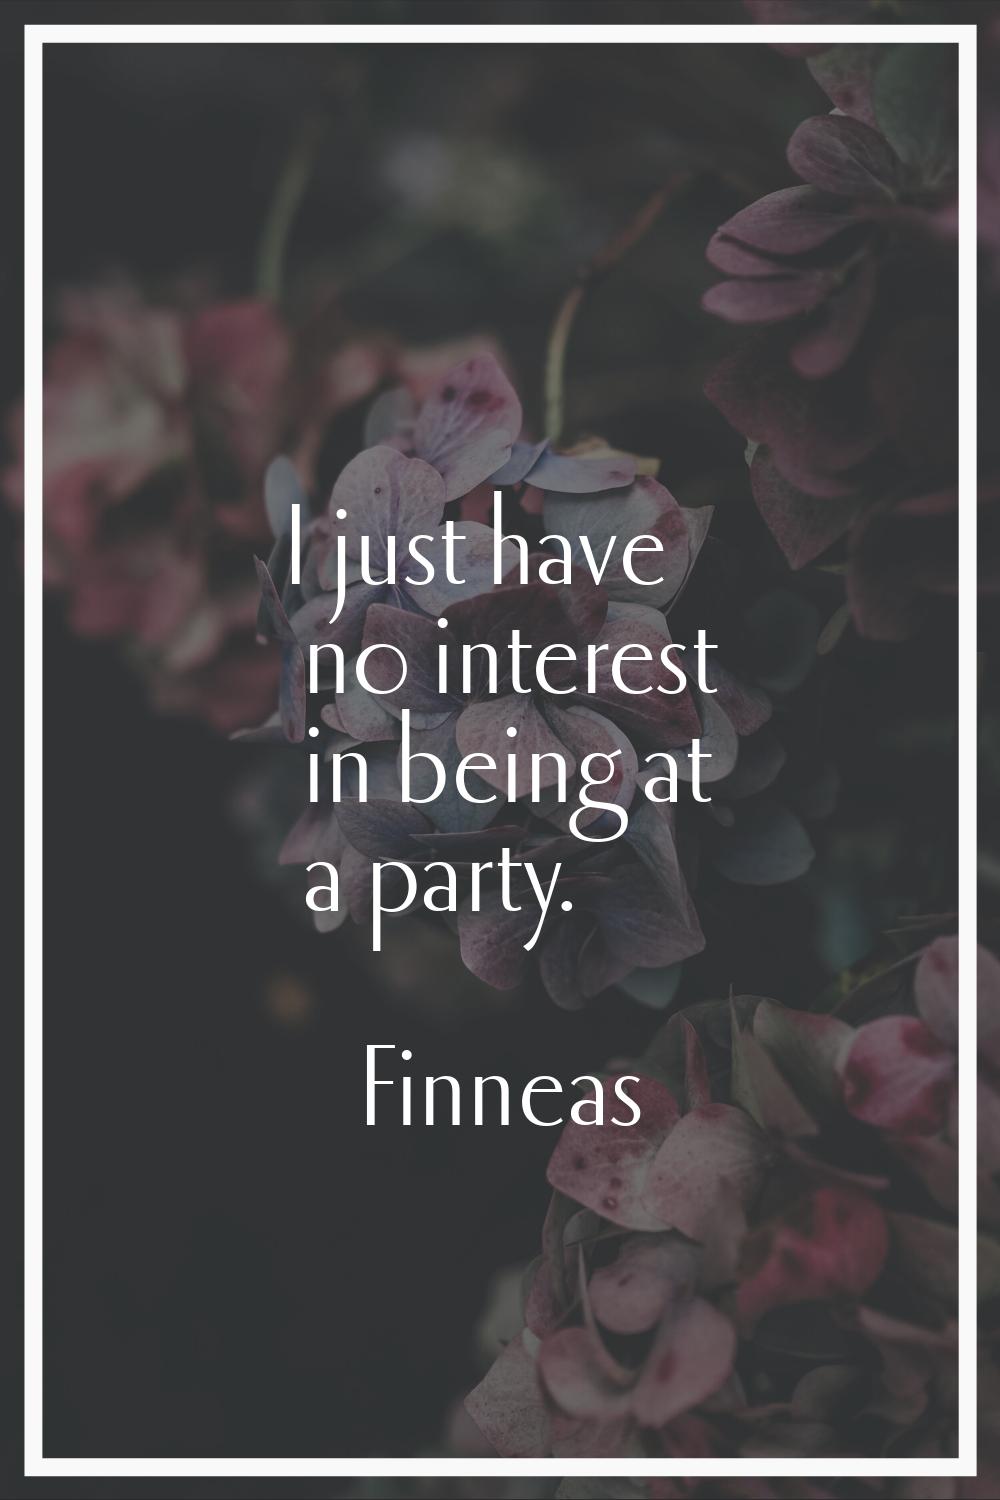 I just have no interest in being at a party.